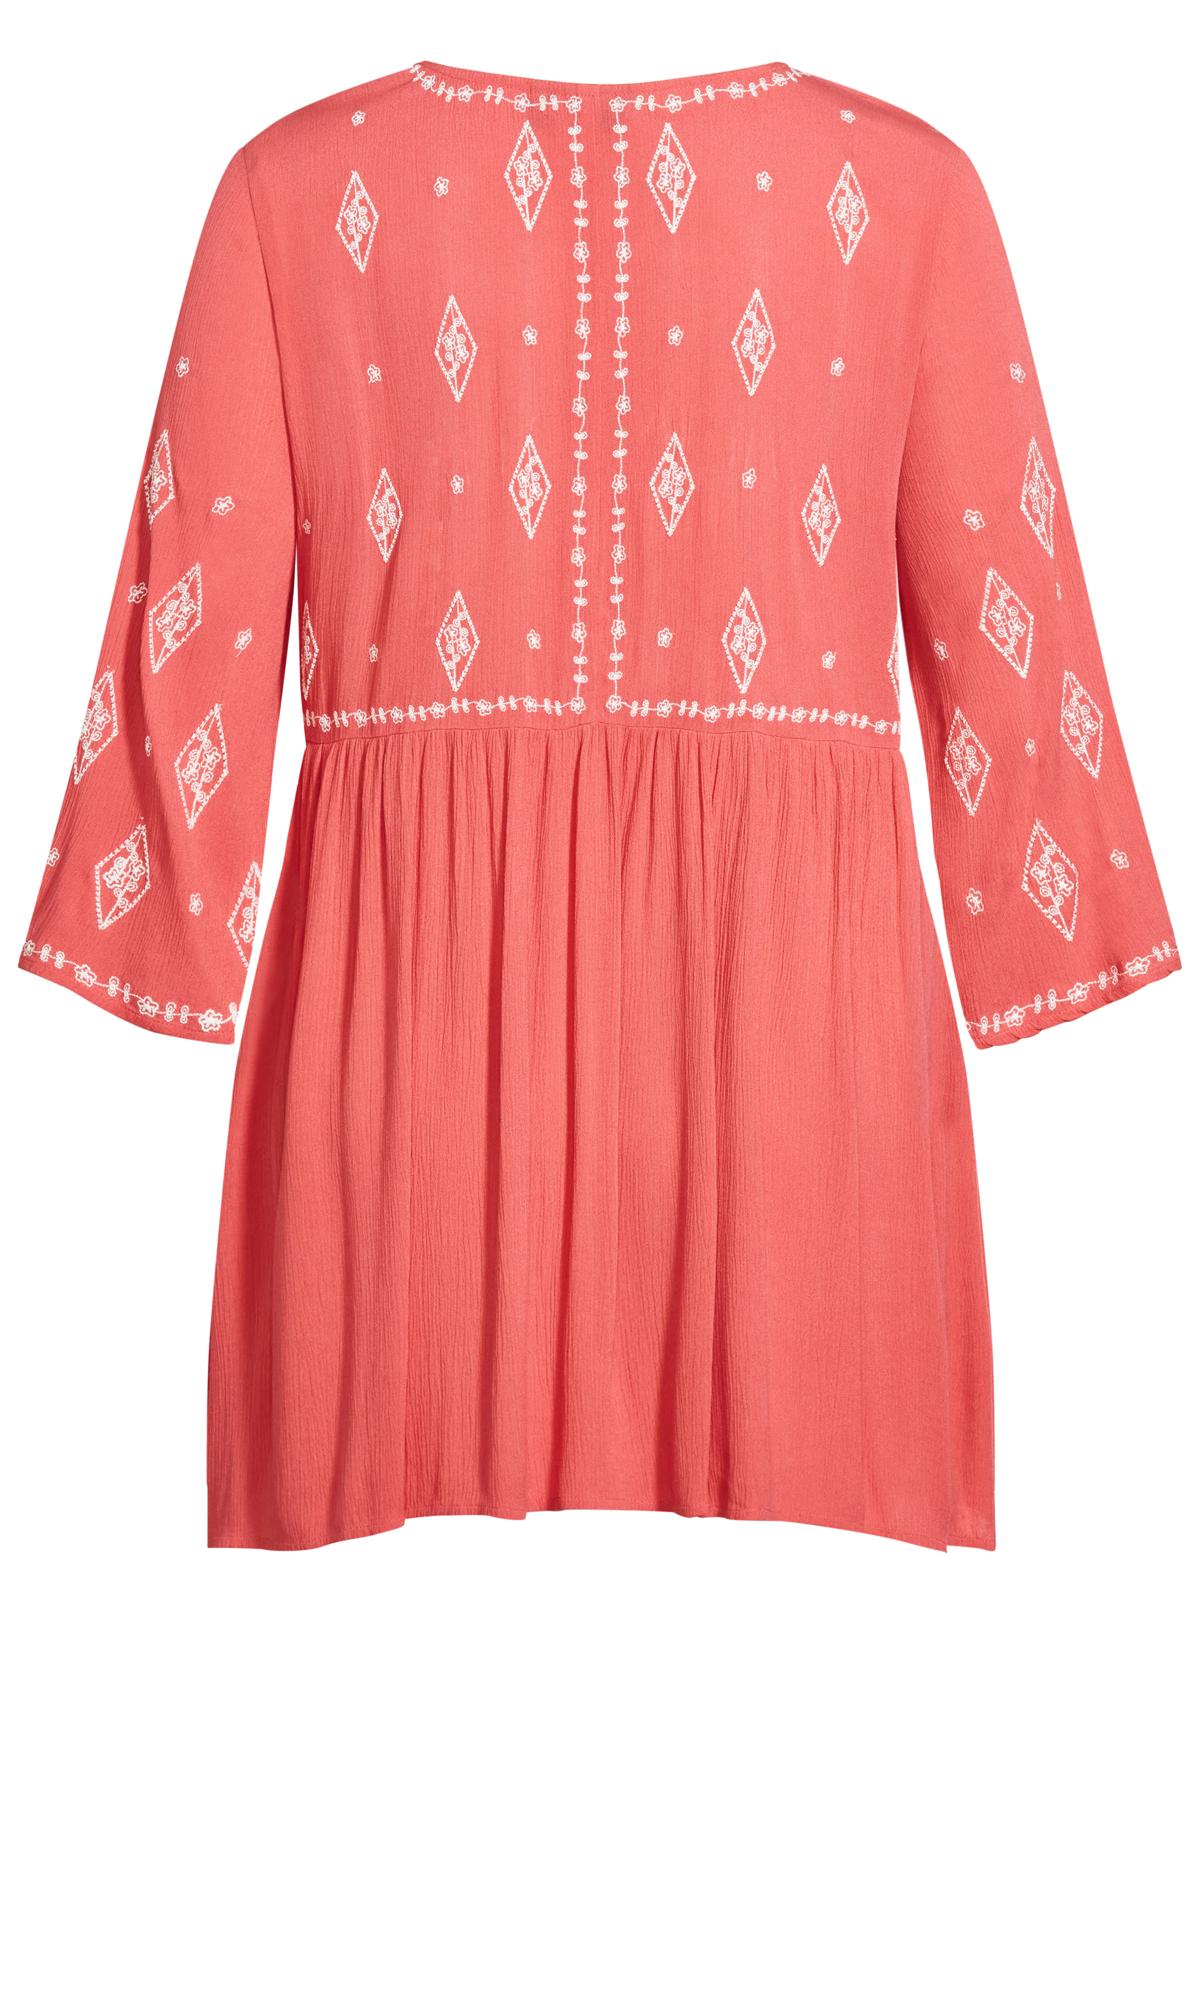 Evans Pink & White Floral Embroided Tunic Top | Evans